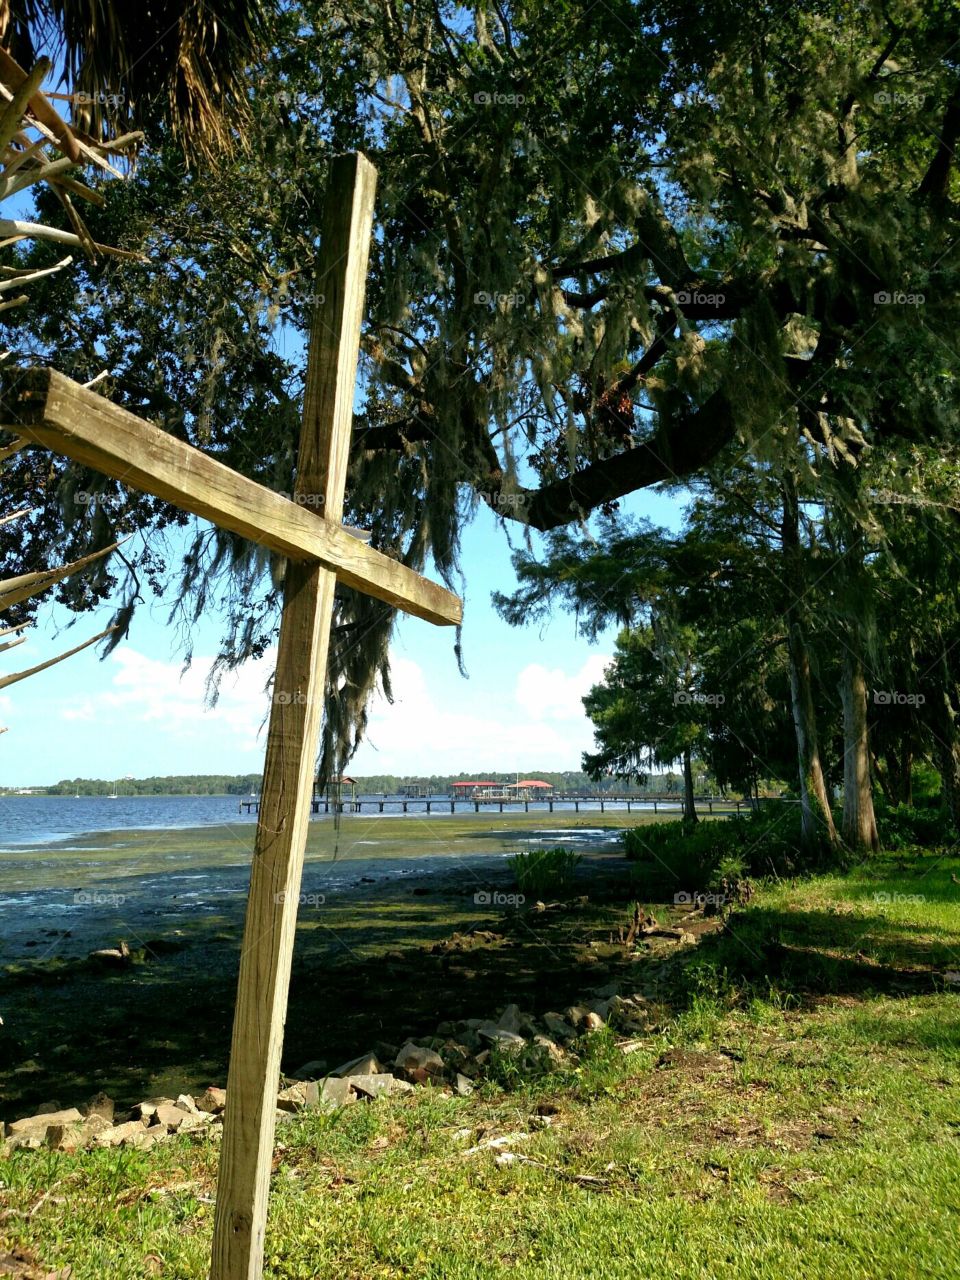 Cross by the River